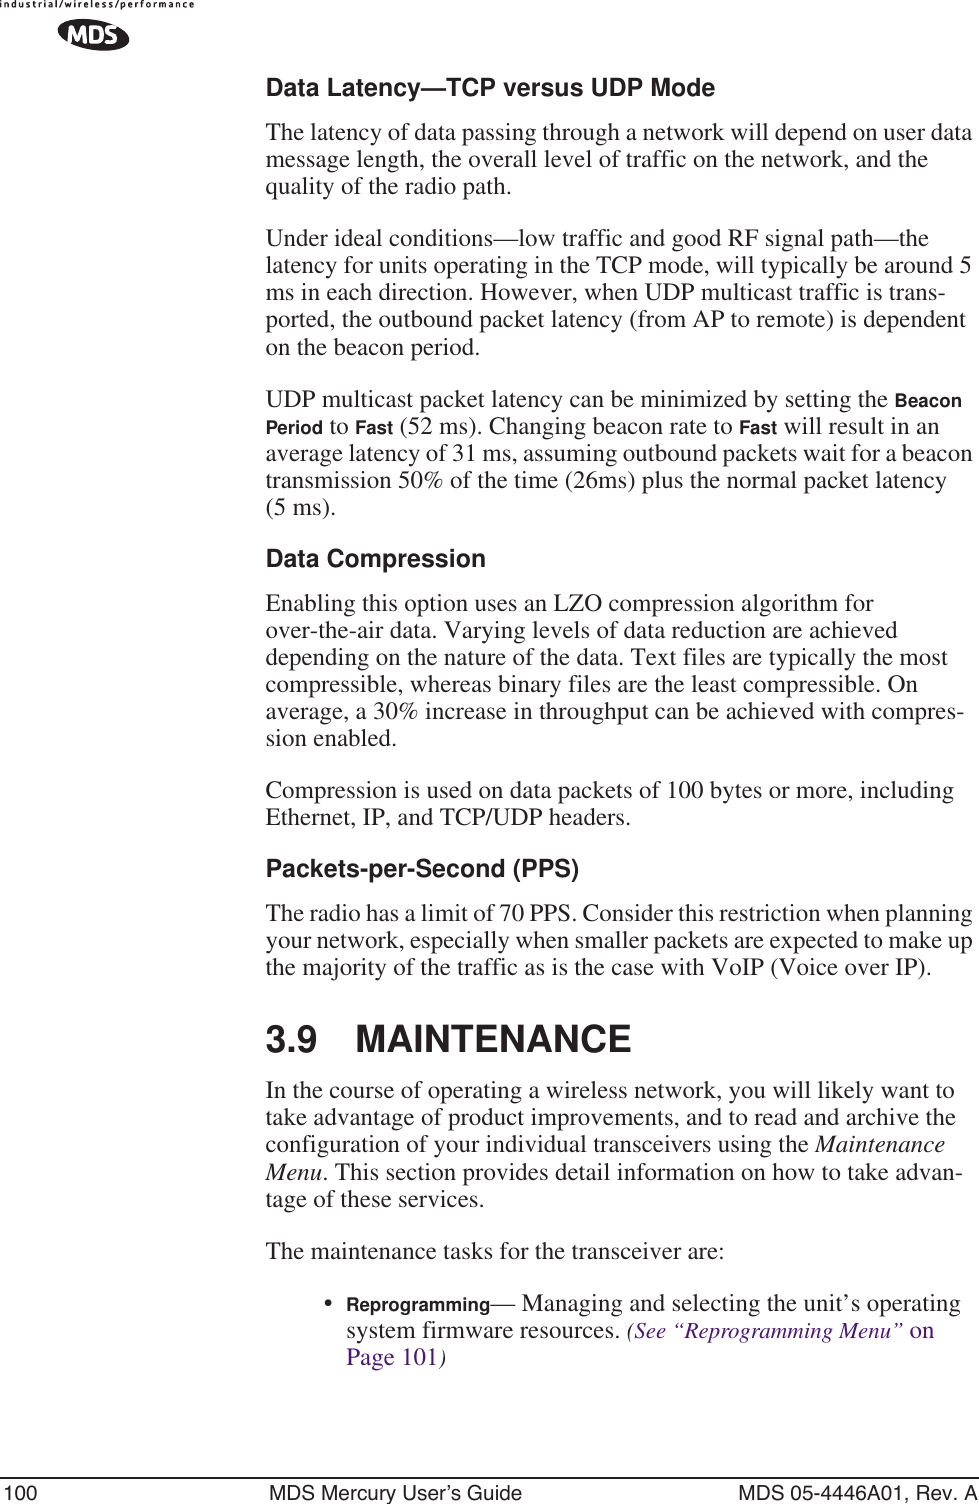 100 MDS Mercury User’s Guide MDS 05-4446A01, Rev. AData Latency—TCP versus UDP ModeThe latency of data passing through a network will depend on user data message length, the overall level of traffic on the network, and the quality of the radio path.Under ideal conditions—low traffic and good RF signal path—the latency for units operating in the TCP mode, will typically be around 5 ms in each direction. However, when UDP multicast traffic is trans-ported, the outbound packet latency (from AP to remote) is dependent on the beacon period.UDP multicast packet latency can be minimized by setting the Beacon Period to Fast (52 ms). Changing beacon rate to Fast will result in an average latency of 31 ms, assuming outbound packets wait for a beacon transmission 50% of the time (26ms) plus the normal packet latency (5 ms).Data CompressionEnabling this option uses an LZO compression algorithm for over-the-air data. Varying levels of data reduction are achieved depending on the nature of the data. Text files are typically the most compressible, whereas binary files are the least compressible. On average, a 30% increase in throughput can be achieved with compres-sion enabled.Compression is used on data packets of 100 bytes or more, including Ethernet, IP, and TCP/UDP headers.Packets-per-Second (PPS)The radio has a limit of 70 PPS. Consider this restriction when planning your network, especially when smaller packets are expected to make up the majority of the traffic as is the case with VoIP (Voice over IP).3.9 MAINTENANCEIn the course of operating a wireless network, you will likely want to take advantage of product improvements, and to read and archive the configuration of your individual transceivers using the Maintenance Menu. This section provides detail information on how to take advan-tage of these services.The maintenance tasks for the transceiver are: •Reprogramming— Managing and selecting the unit’s operating system firmware resources. (See “Reprogramming Menu” on Page 101)